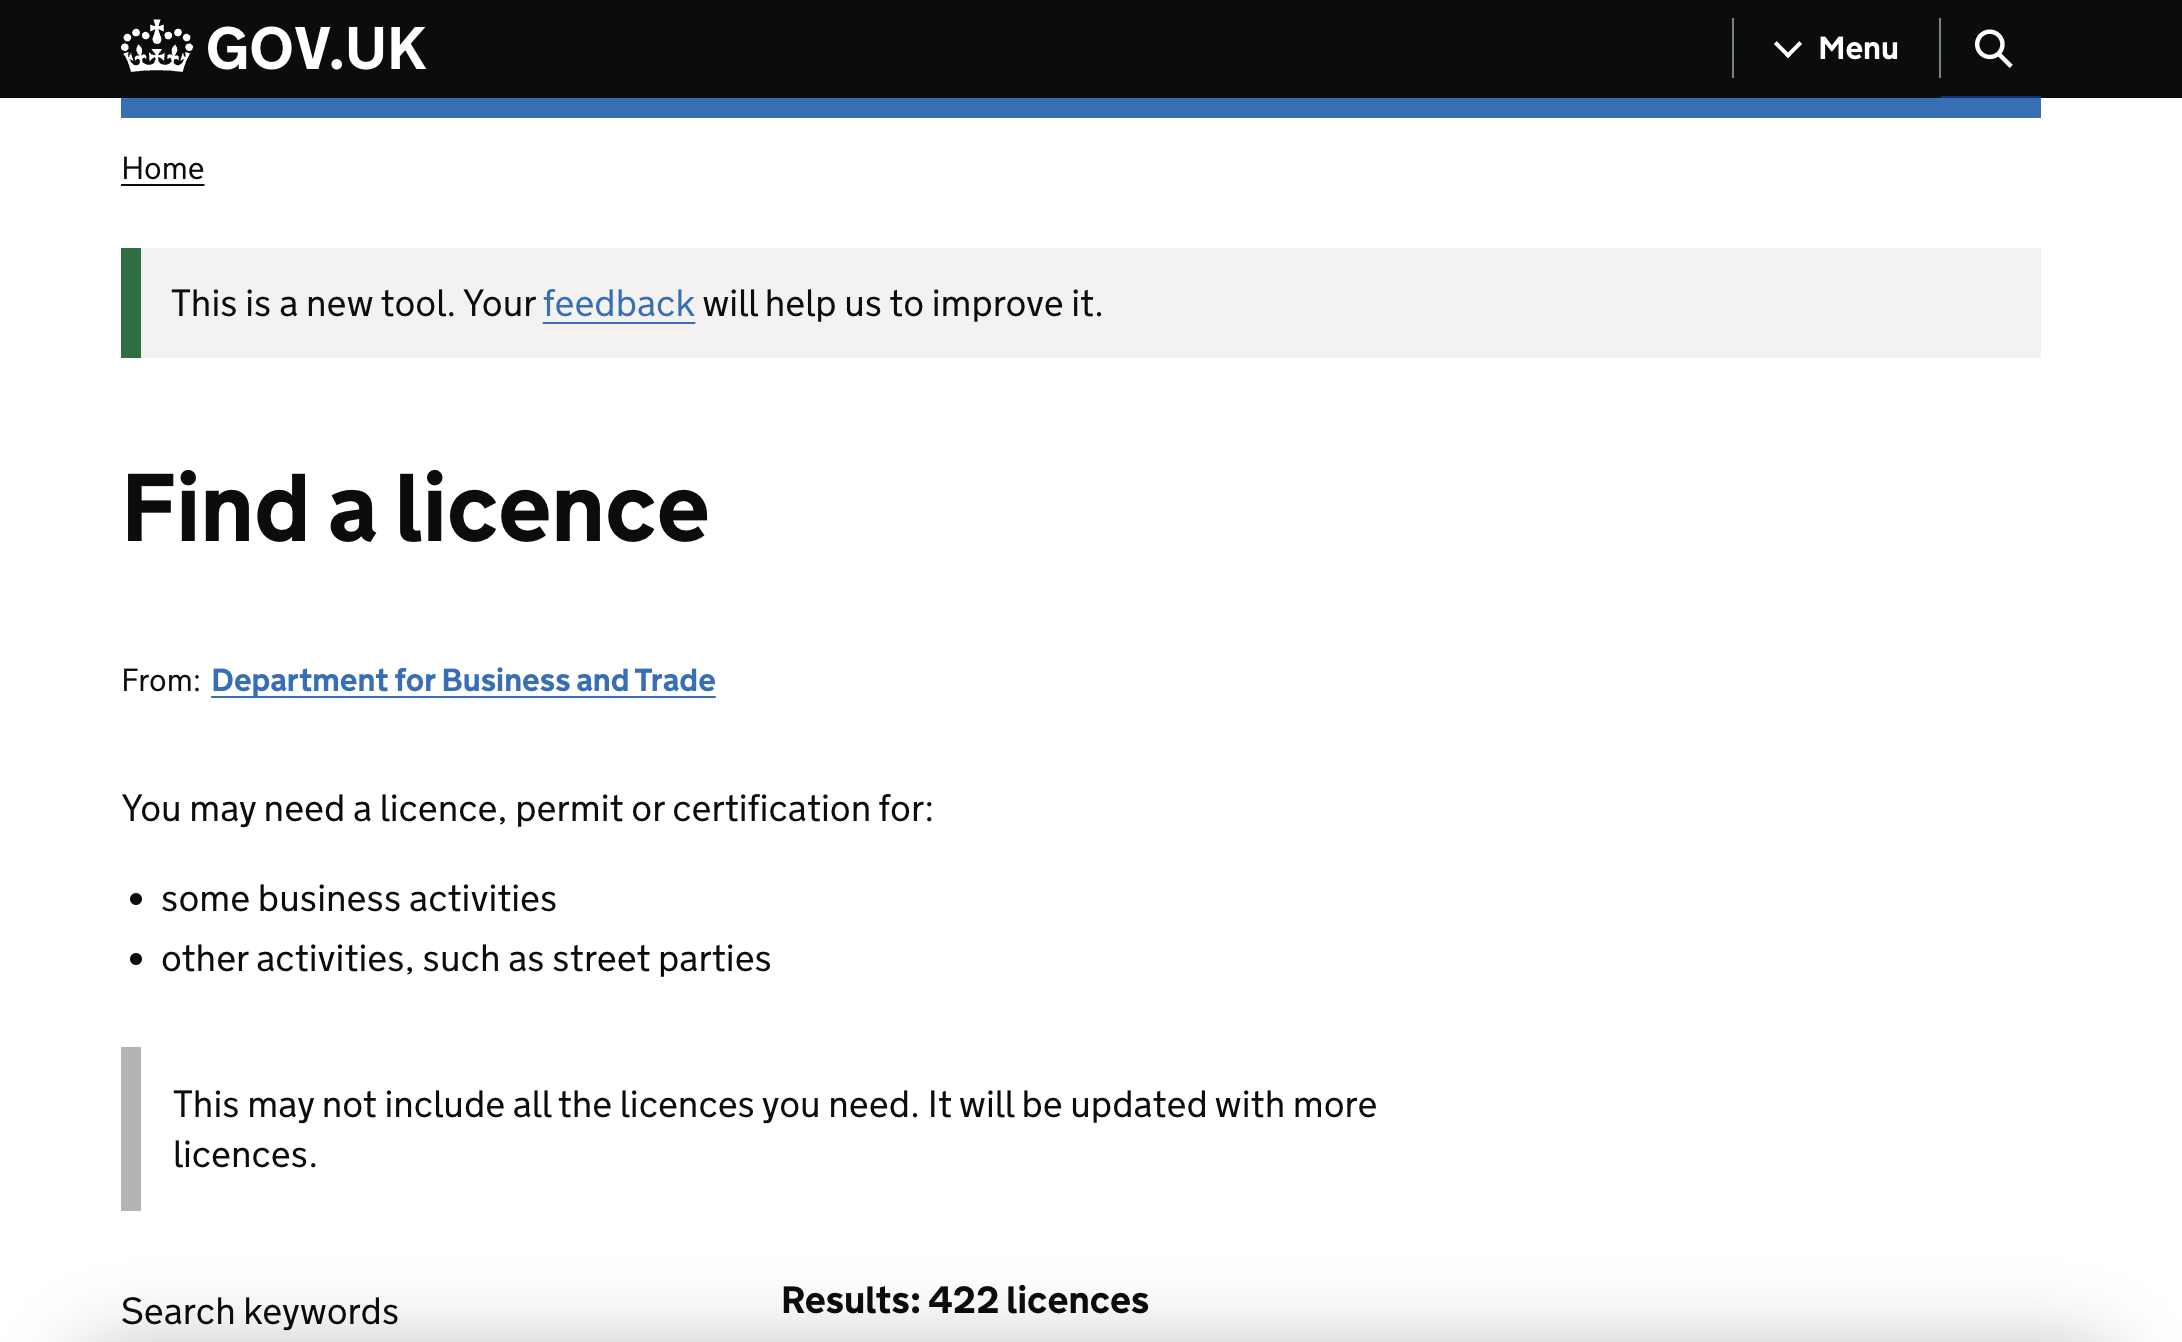 Find a licence From Department for Business and Trade. You may need a licence, permit or certification for some business activities or other activities, such as street parties. This may not include all the licences you need. It will be updated with more l